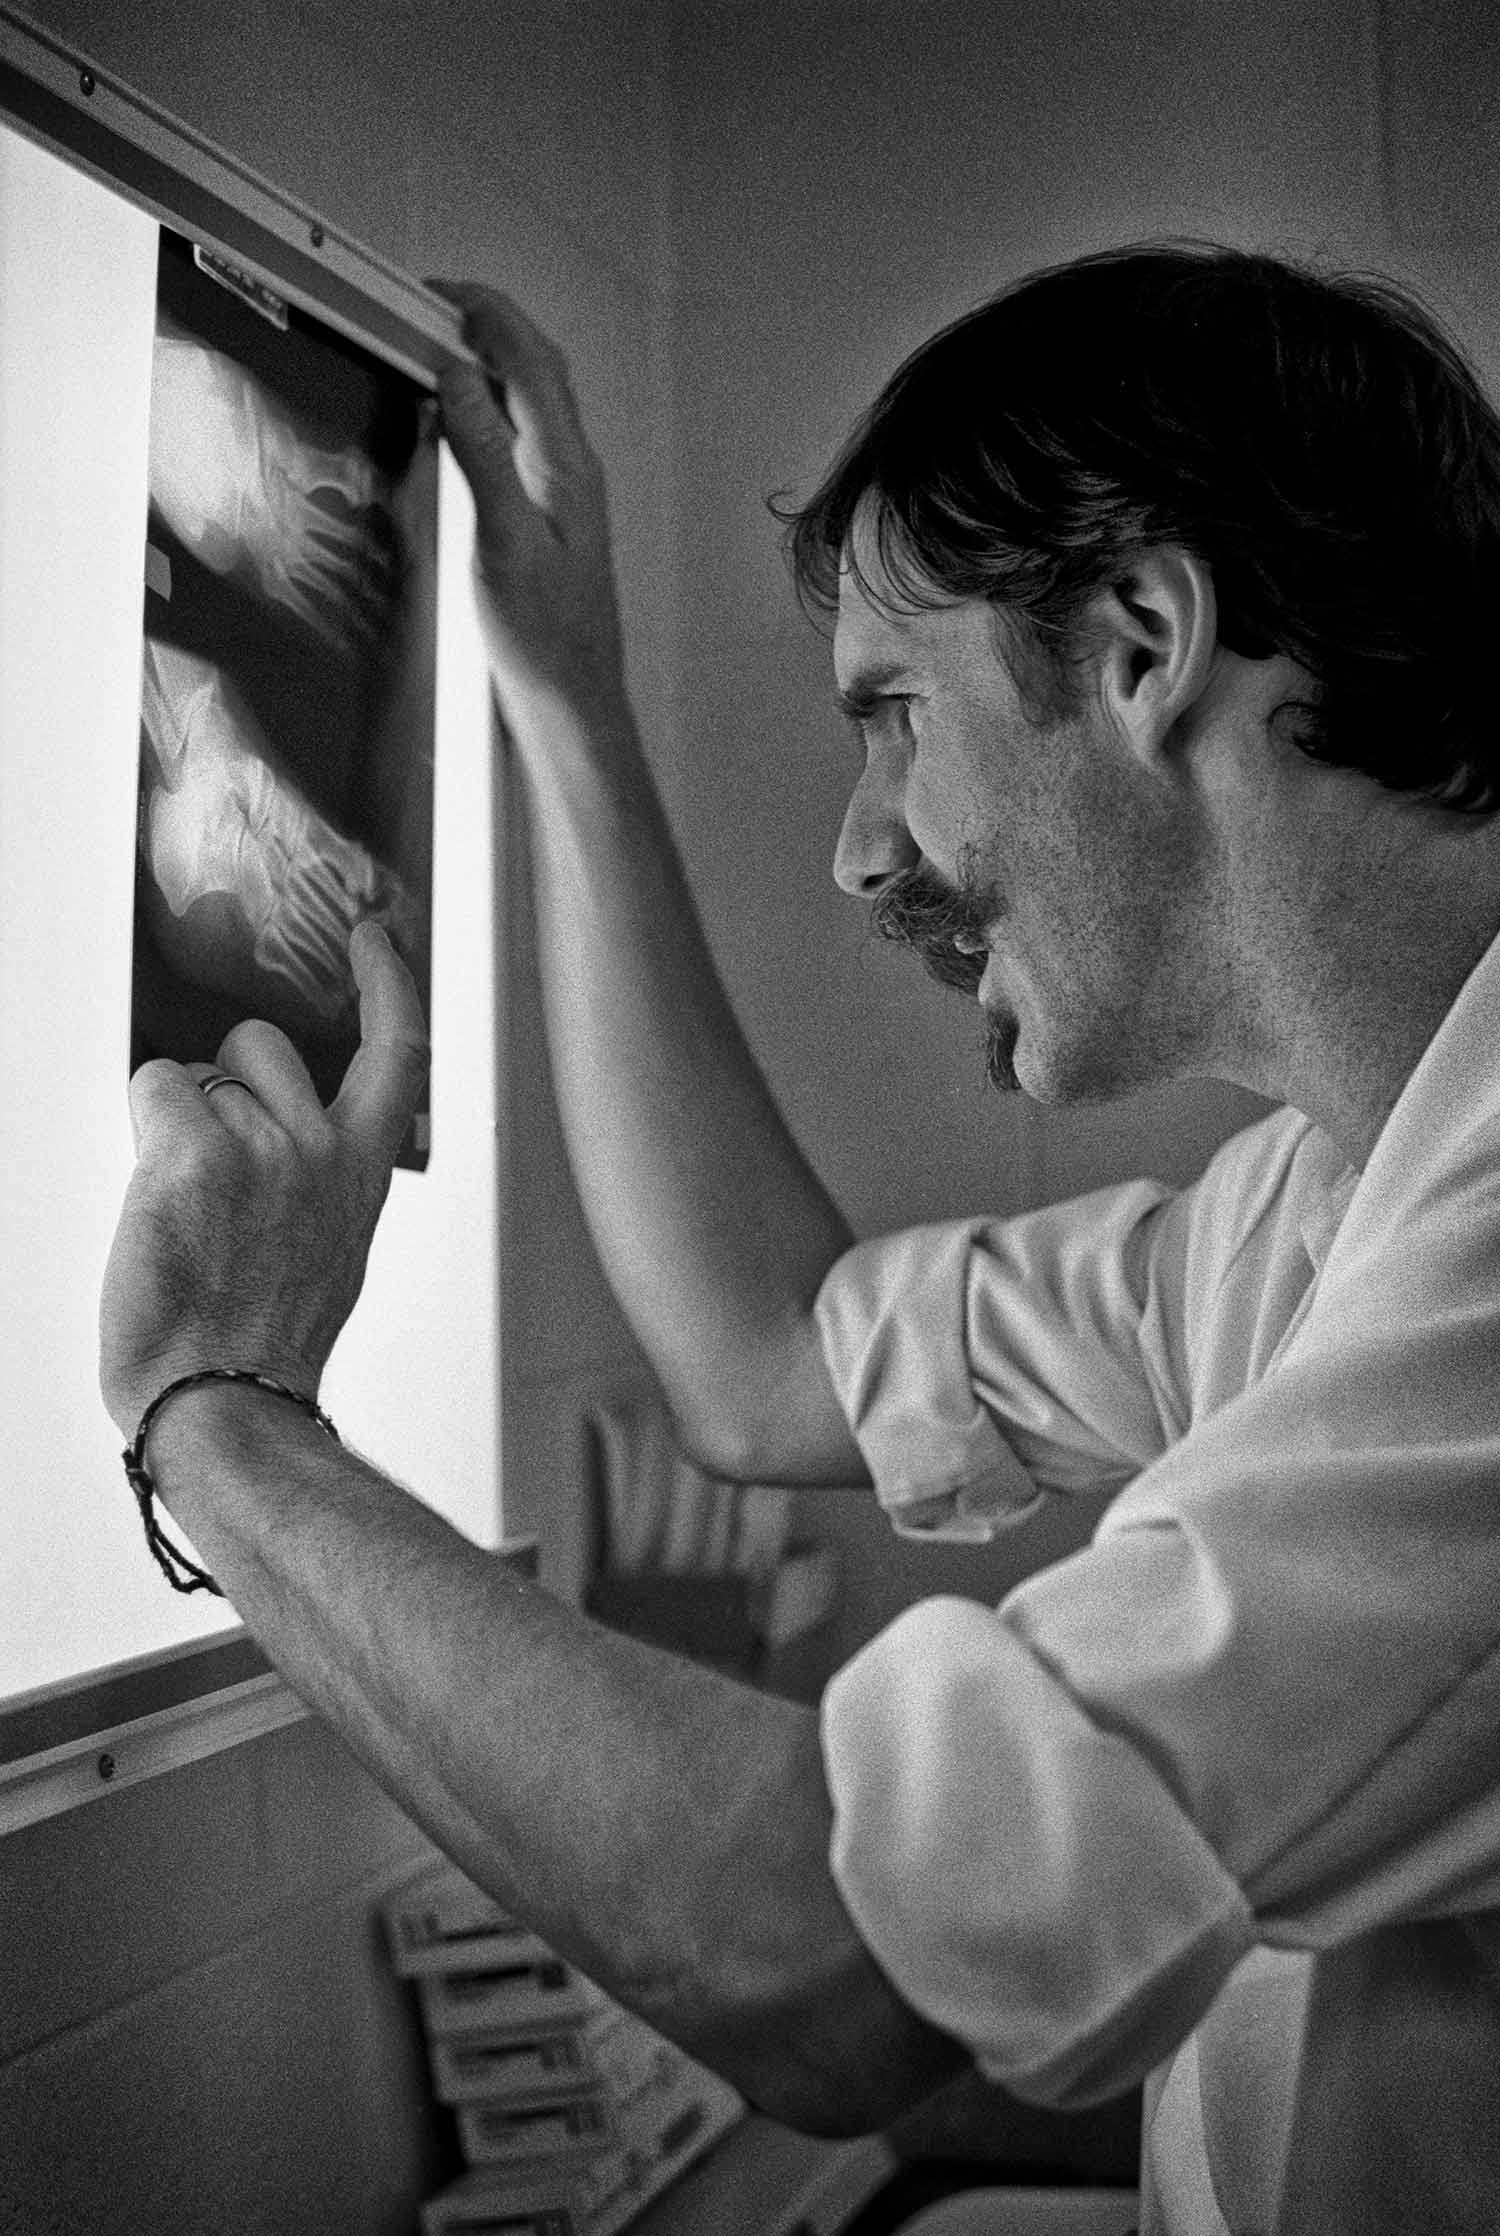 In the hospital emergency room,Dr. John Pillow studies an x-ray of a possible fracture. Photo by Carol Morgan - 1995